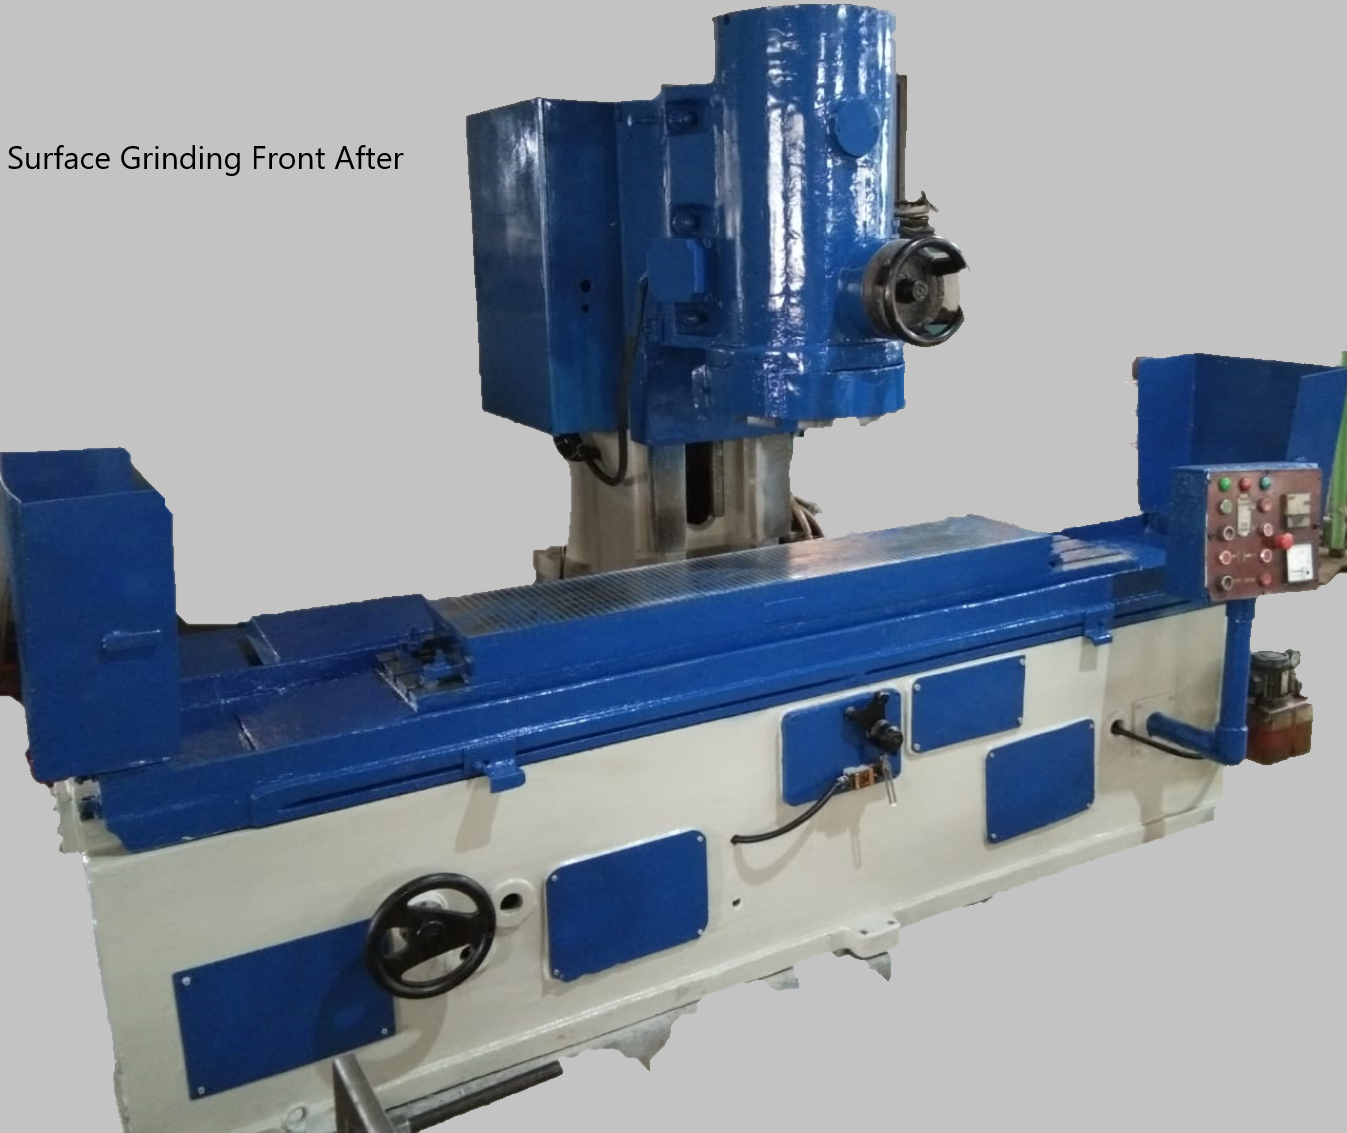 Surface Grinding Machine After Final